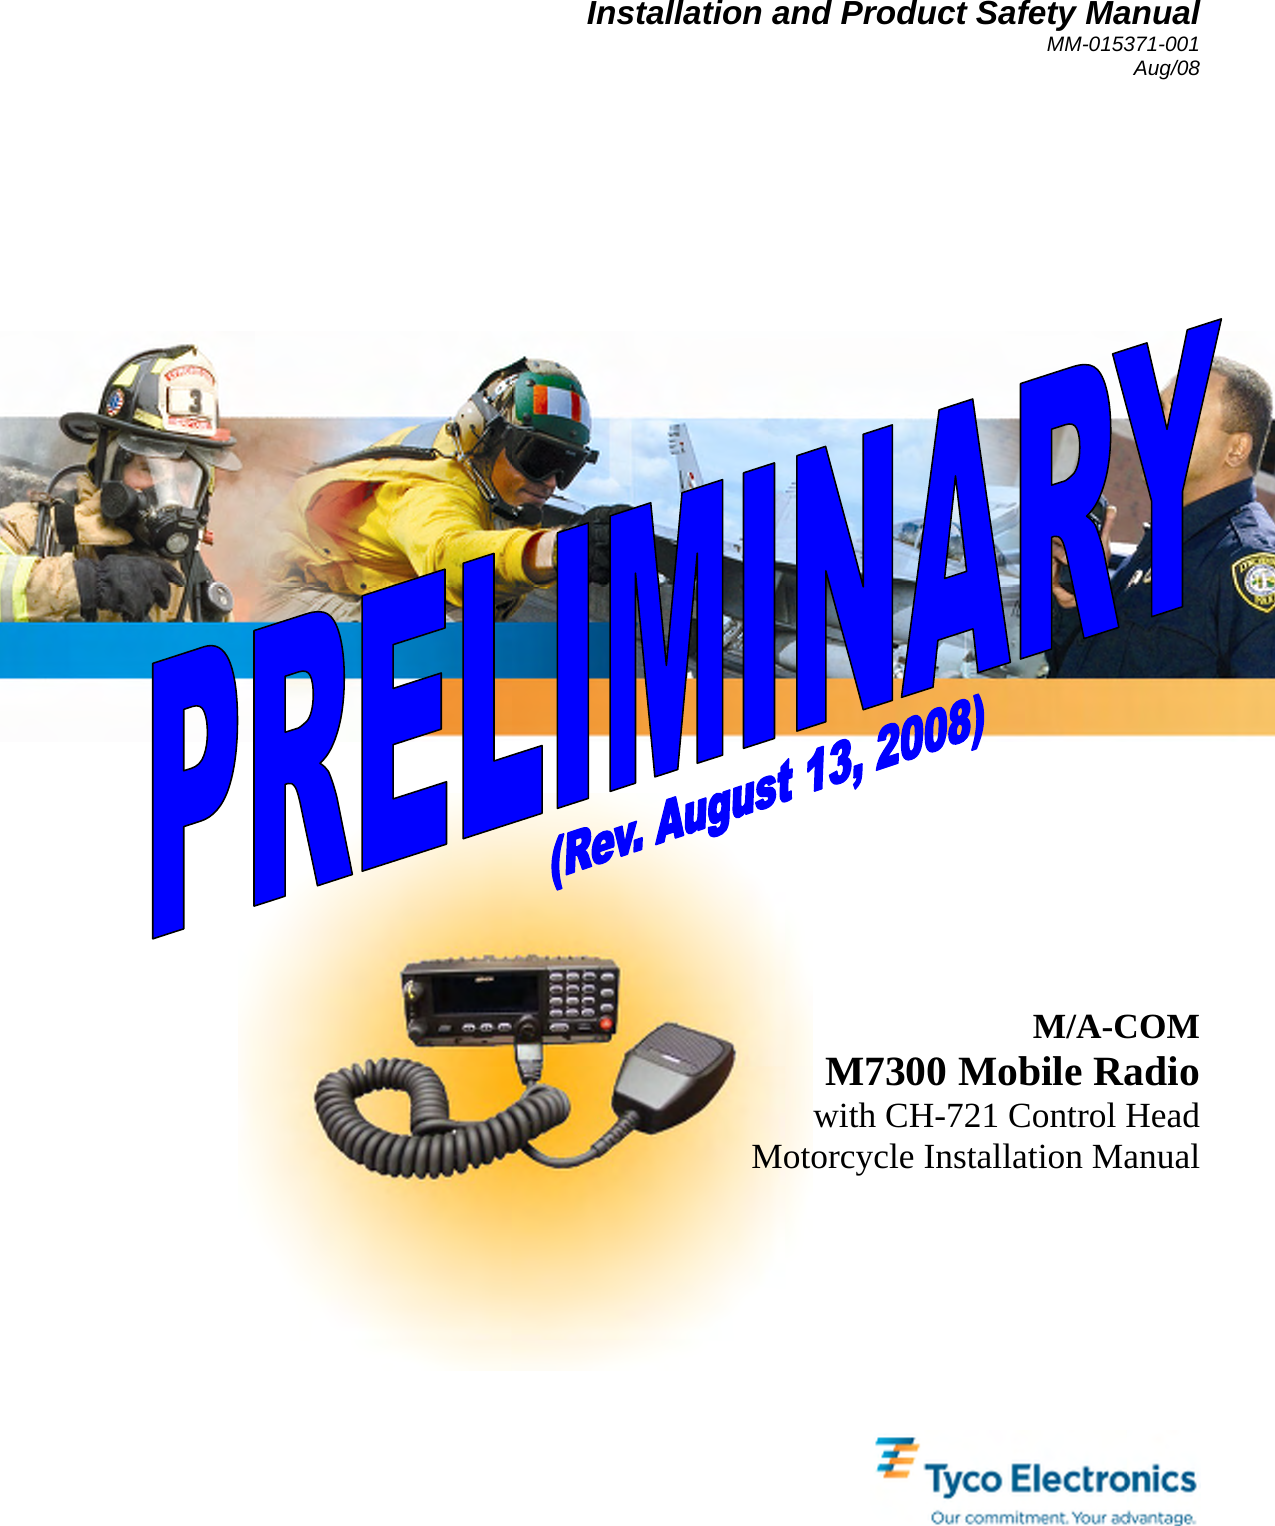 Installation and Product Safety Manual MM-015371-001 Aug/08 M/A-COM M7300 Mobile Radio with CH-721 Control Head Motorcycle Installation Manual  